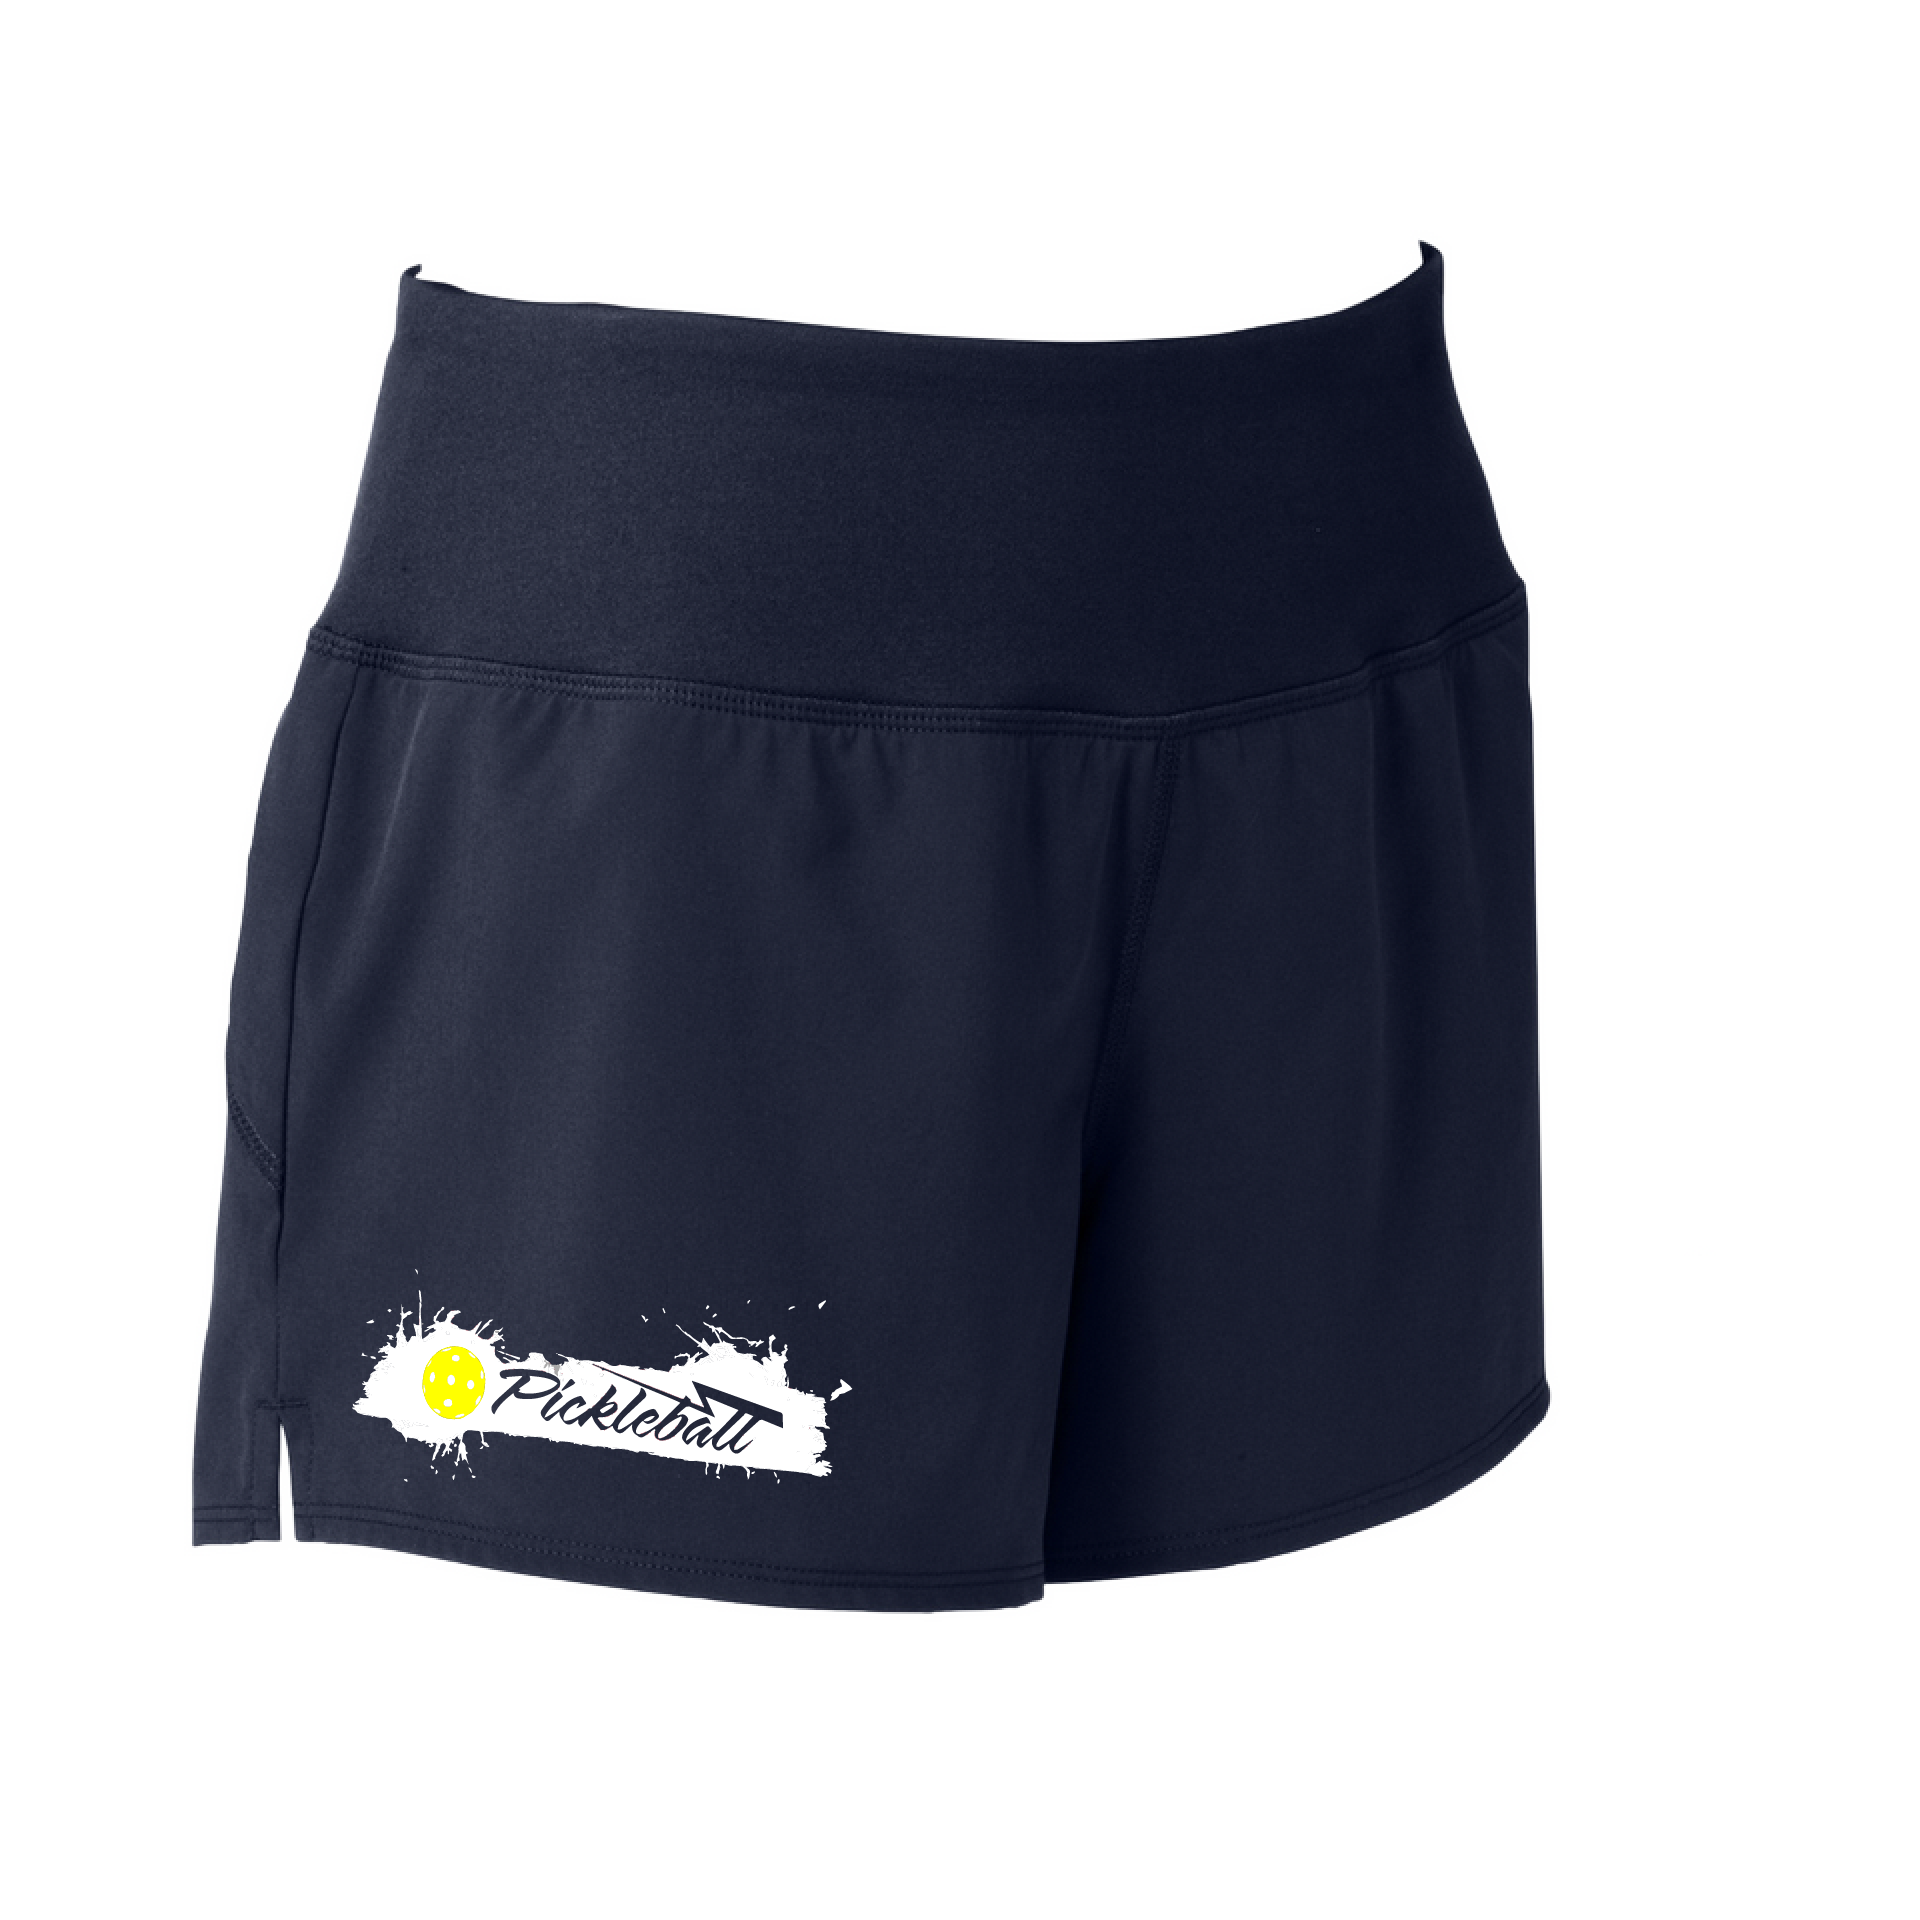 Pickleball Designs: Extreme Pickleball  Sport Tek women’s repeat shorts come with built-in cell phone pocket on the exterior of the waistband. You can also feel secure knowing that no matter how strenuous the exercise, the shorts will remain in place (it won’t ride up!). These shorts are extremely versatile and trendy. Transition from the Pickleball court to running errands smoothly.